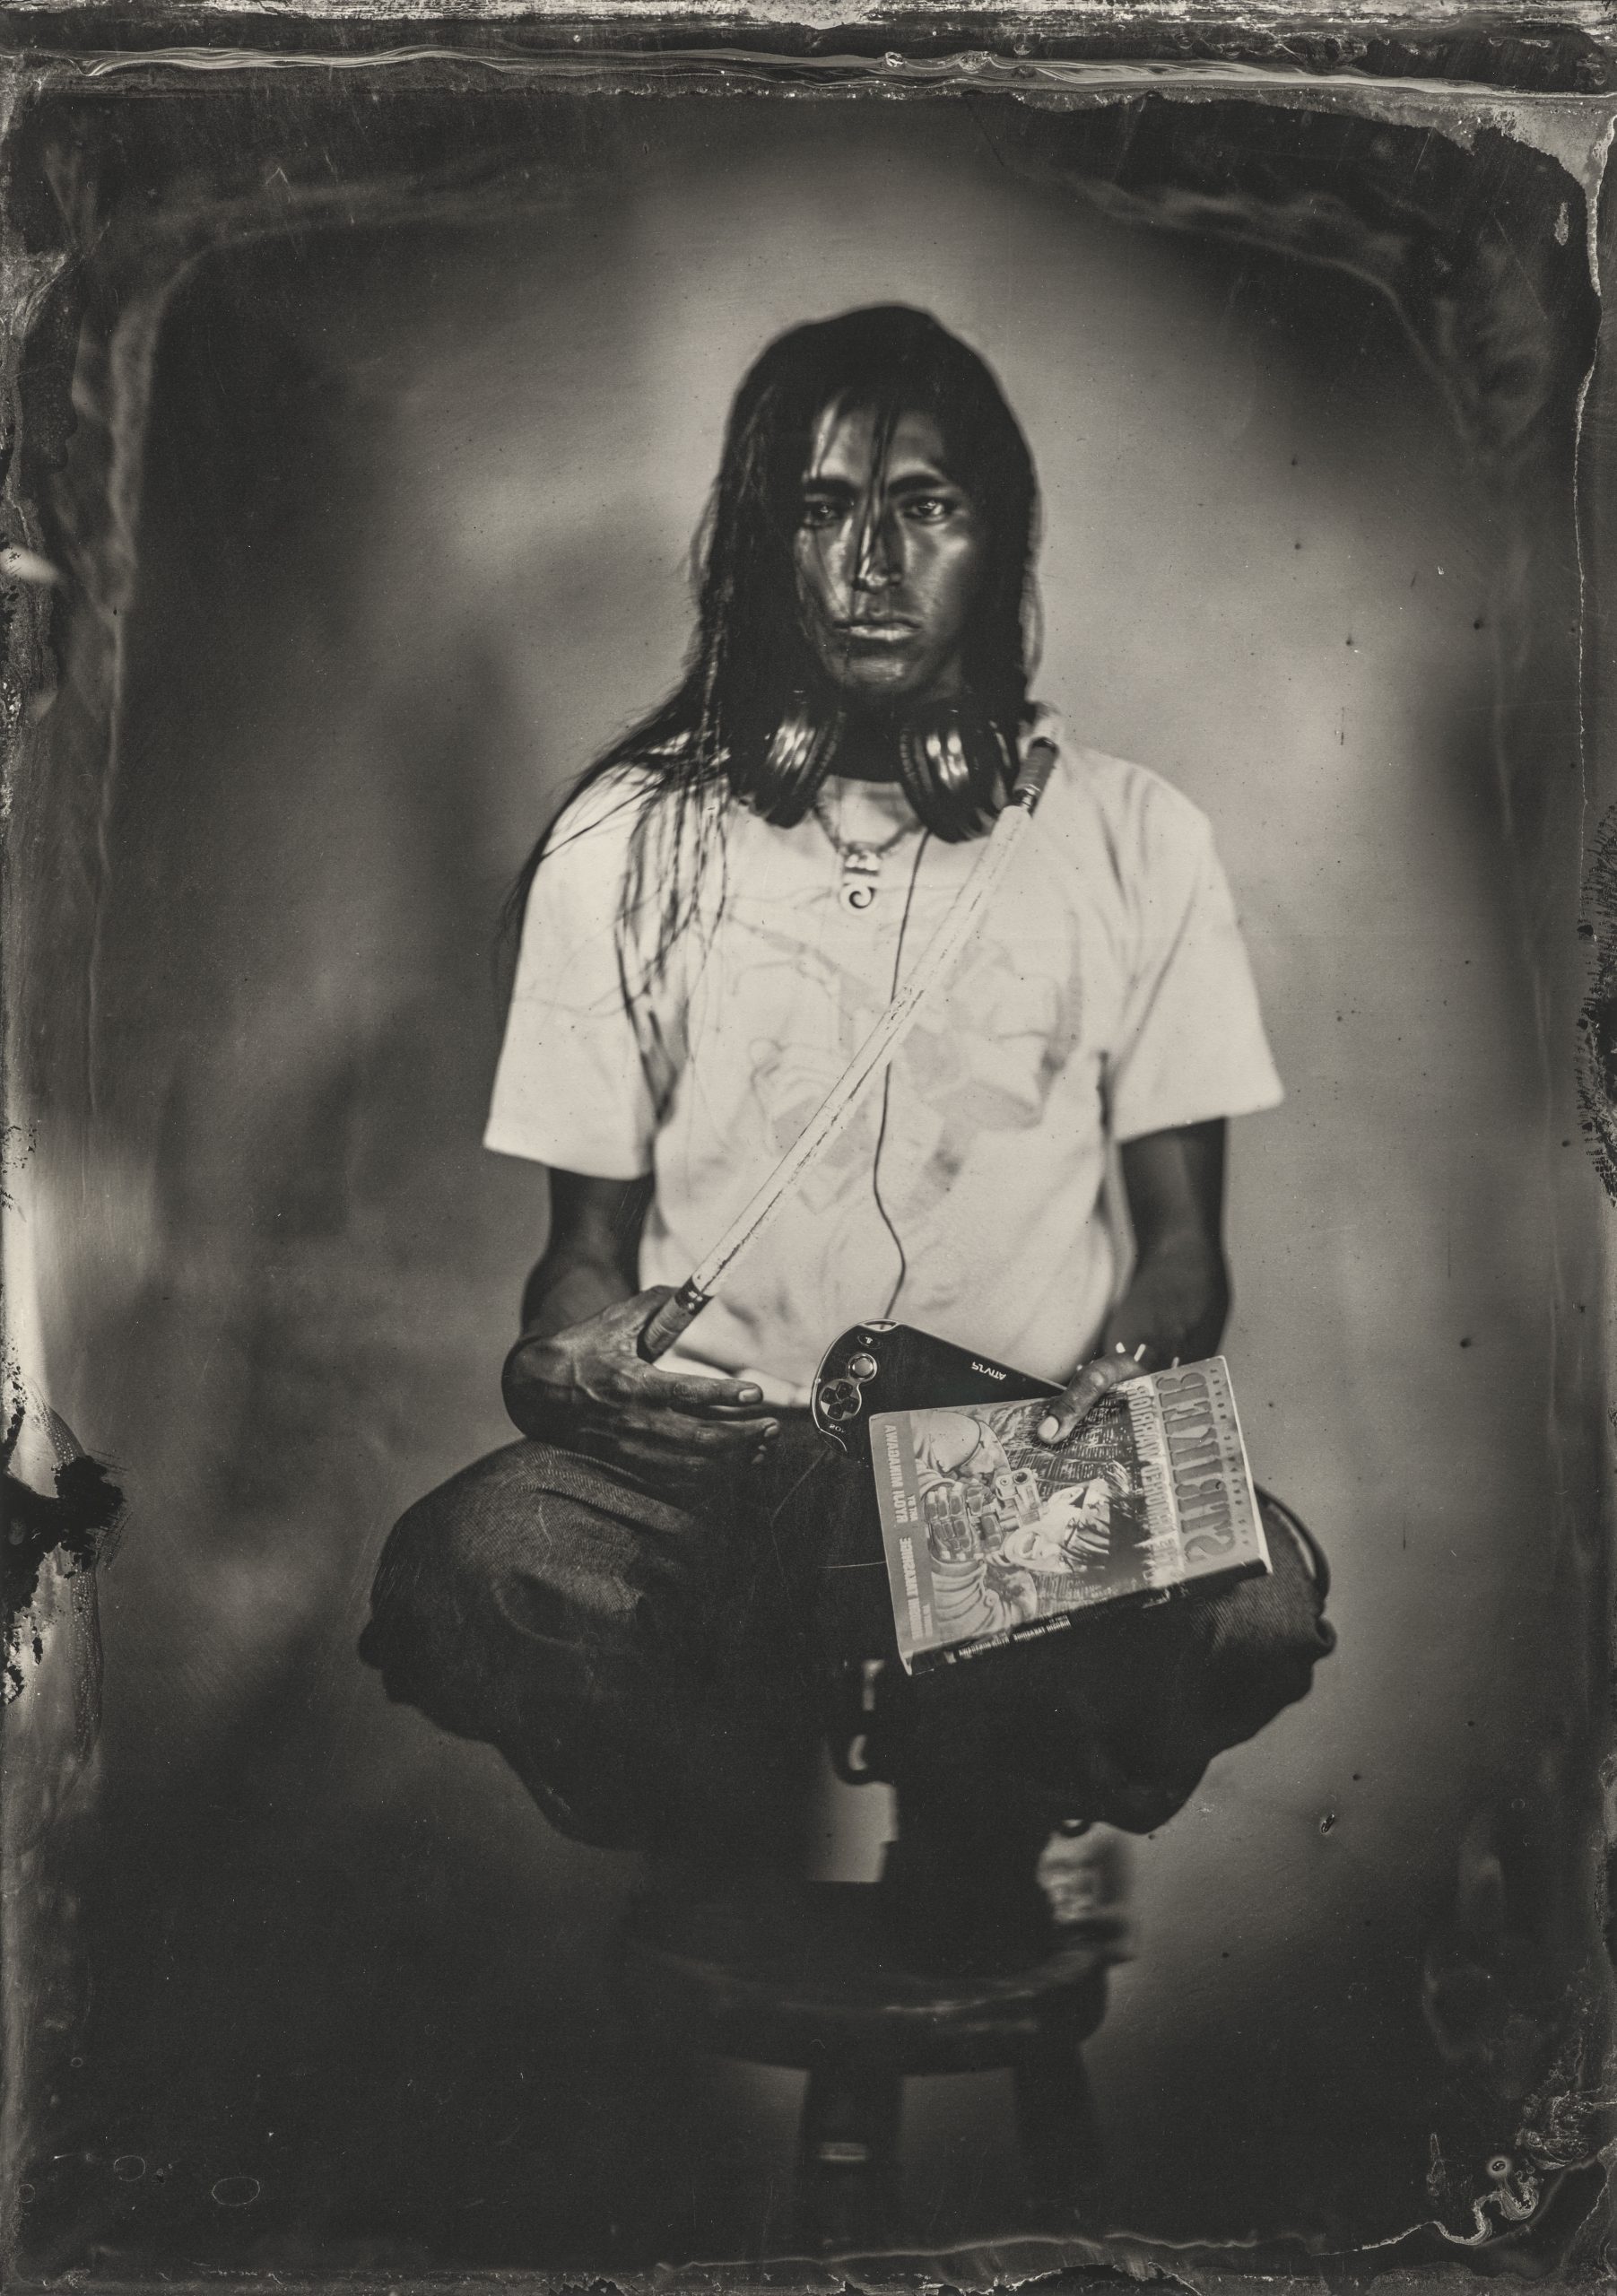 Black-and=white photograph of an Indigenous American person crouched on a stook, wearing a short-sleeved white shirt and holding a magazine in one hand.